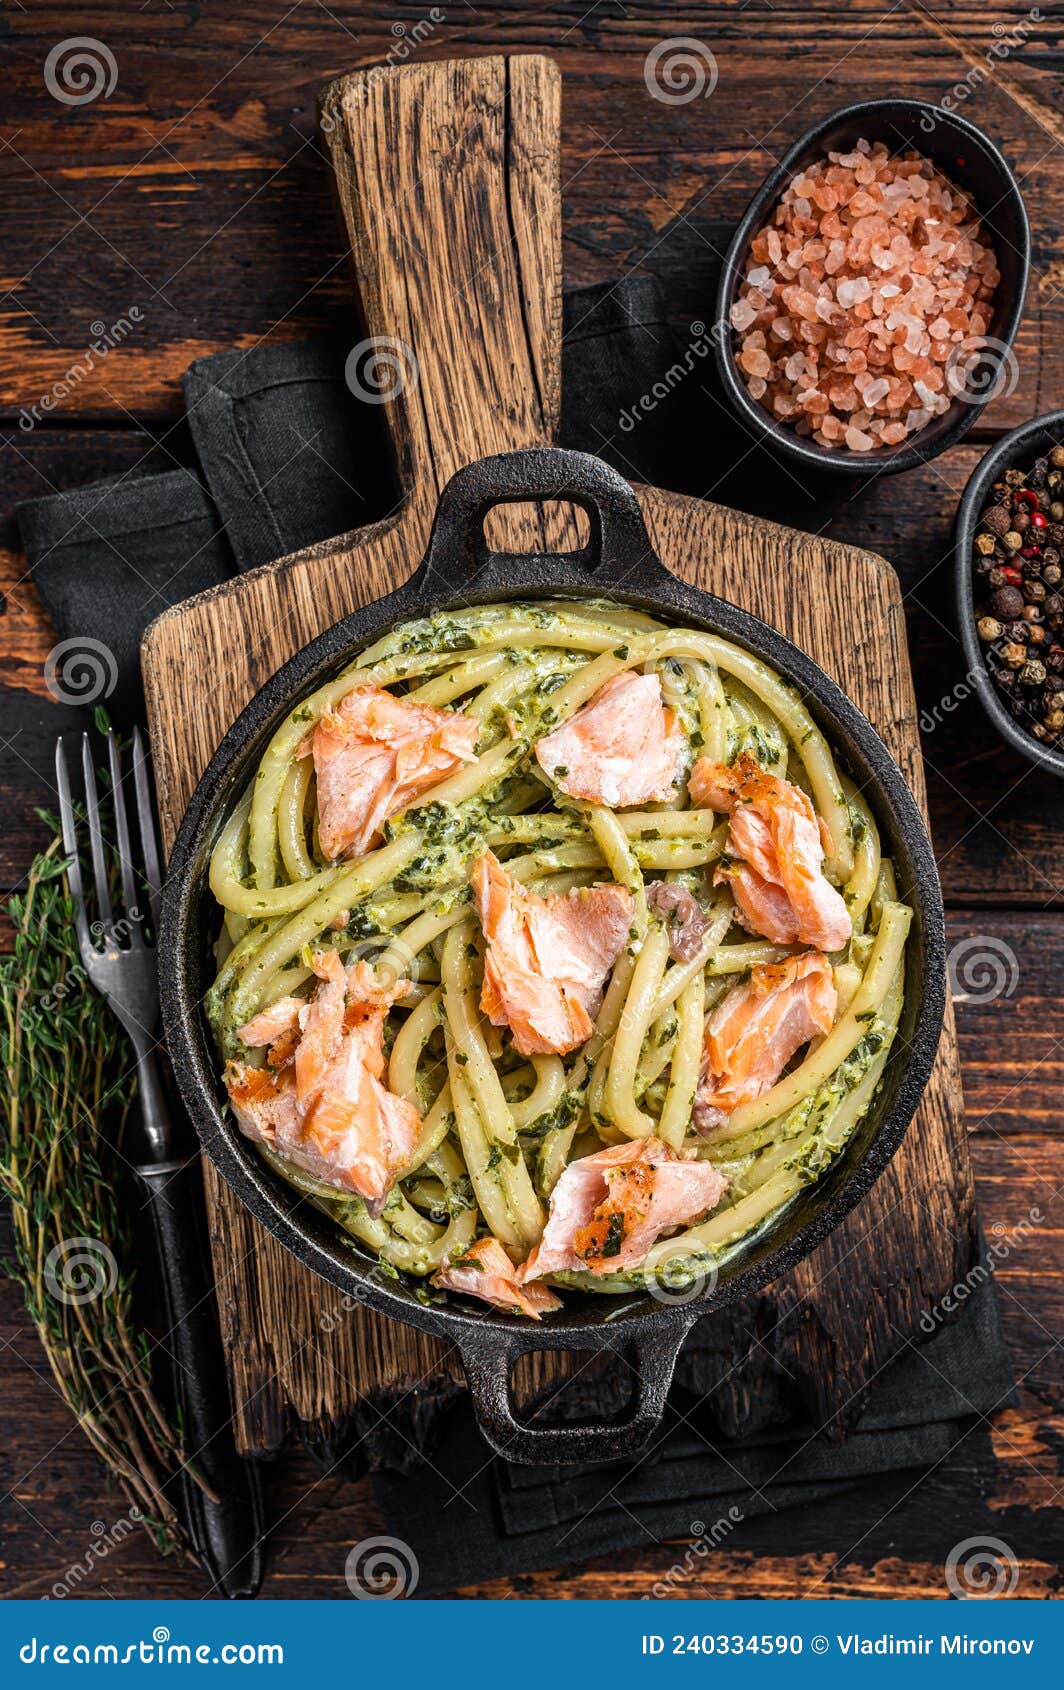 Salmon Bucatini Pasta with Creamy Spinach Sauce and Fish Fillet. Wooden ...